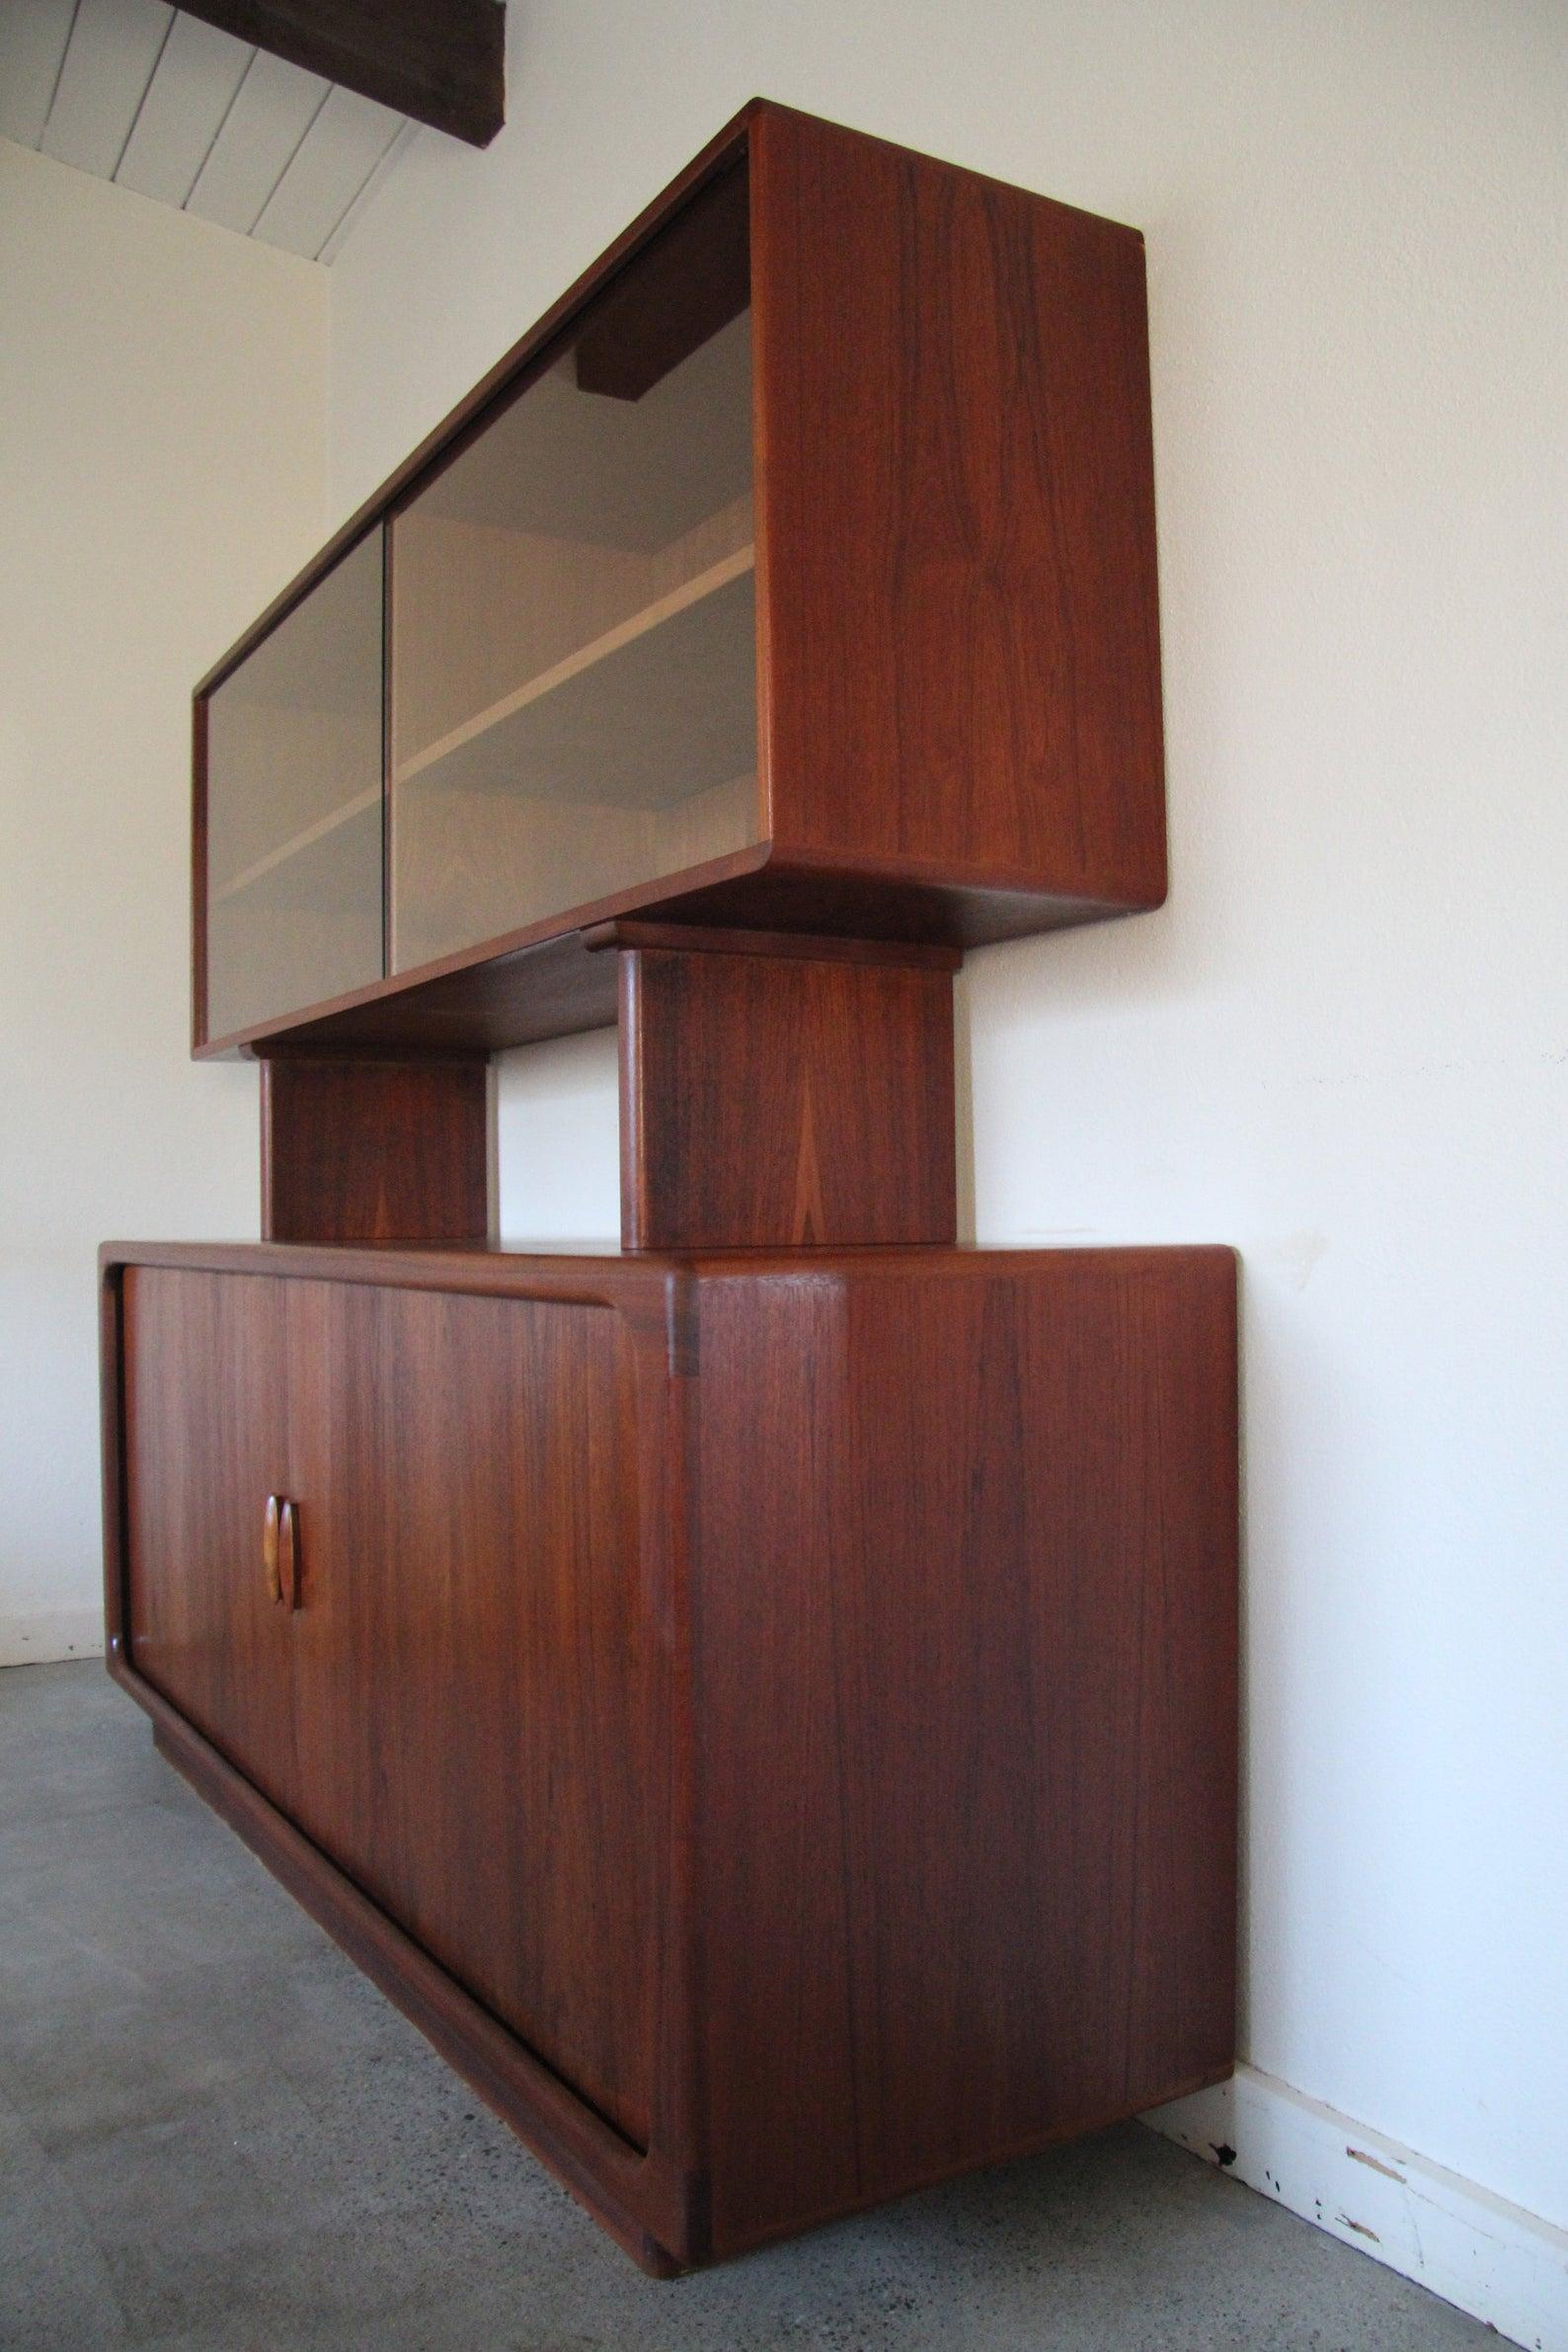 Danish modern teak credenza hutch has a removable top piece that has sliding glass doors that open to shelving. Bottom piece has two tambour doors with carved teak handles that open to adjustable shelves.